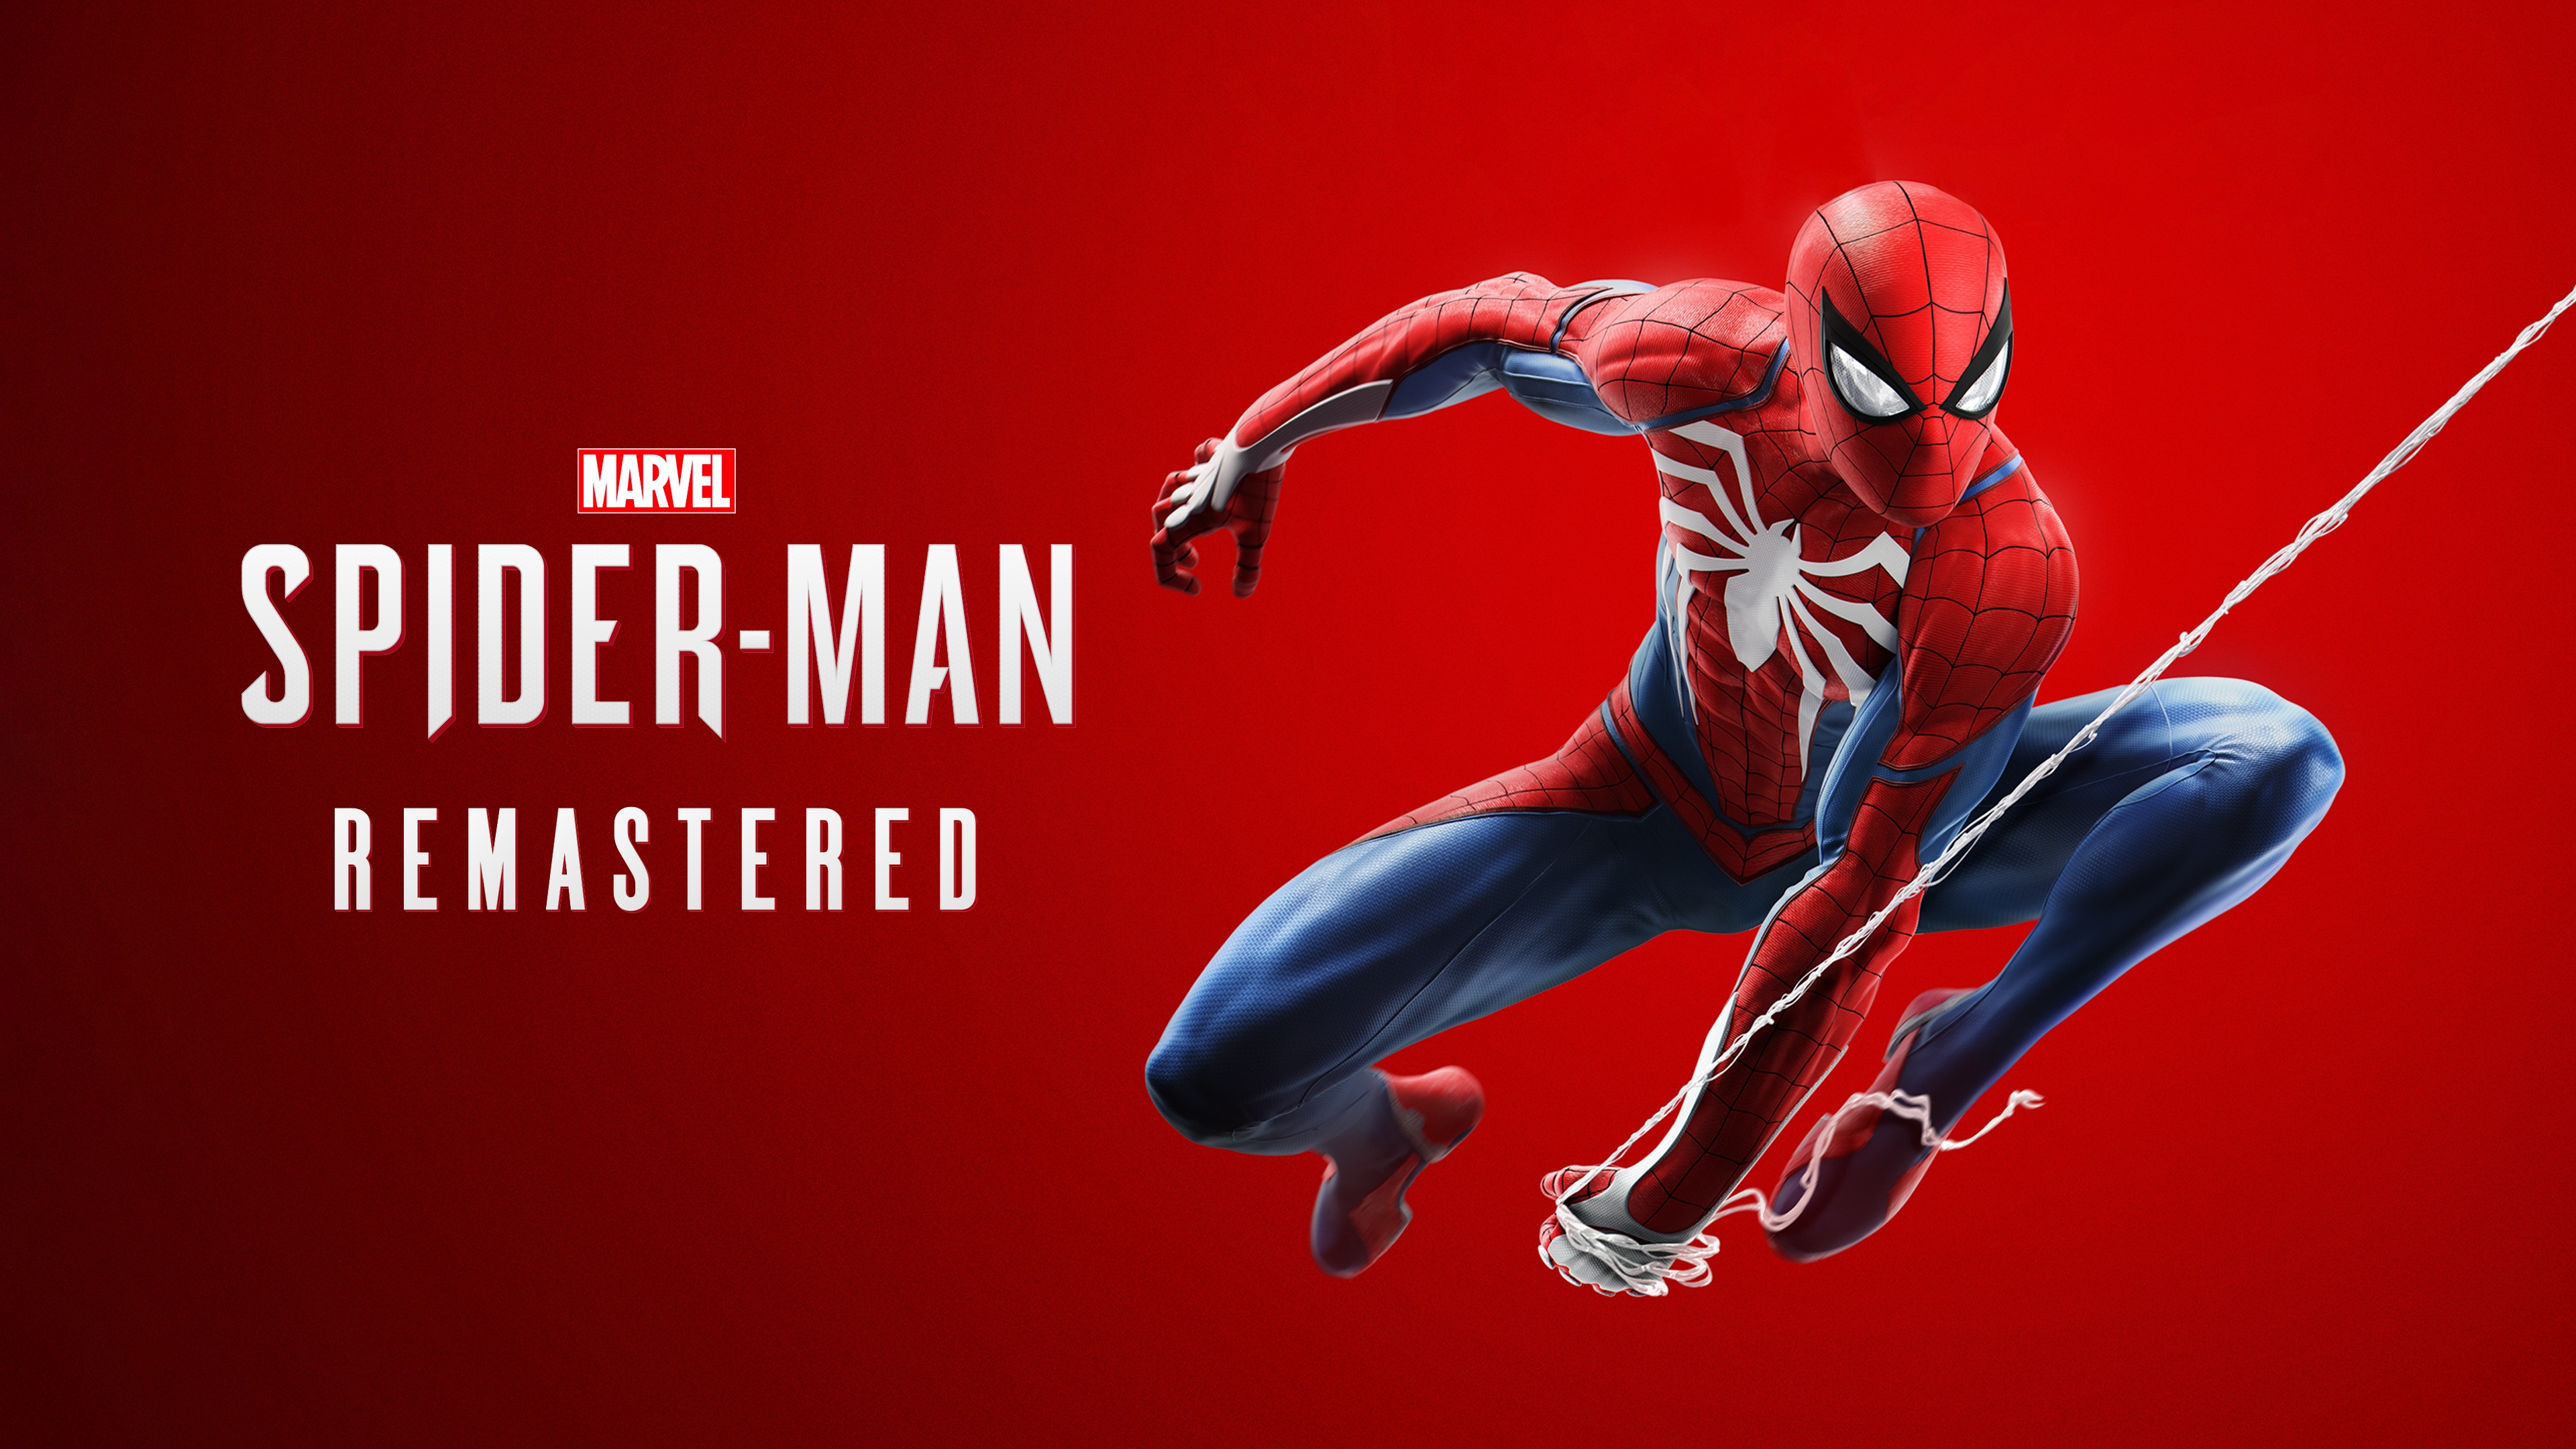 SPIDER-MAN REMASTERED (PC, PS5) VALE A PENA? ANÁLISE - REVIEW 